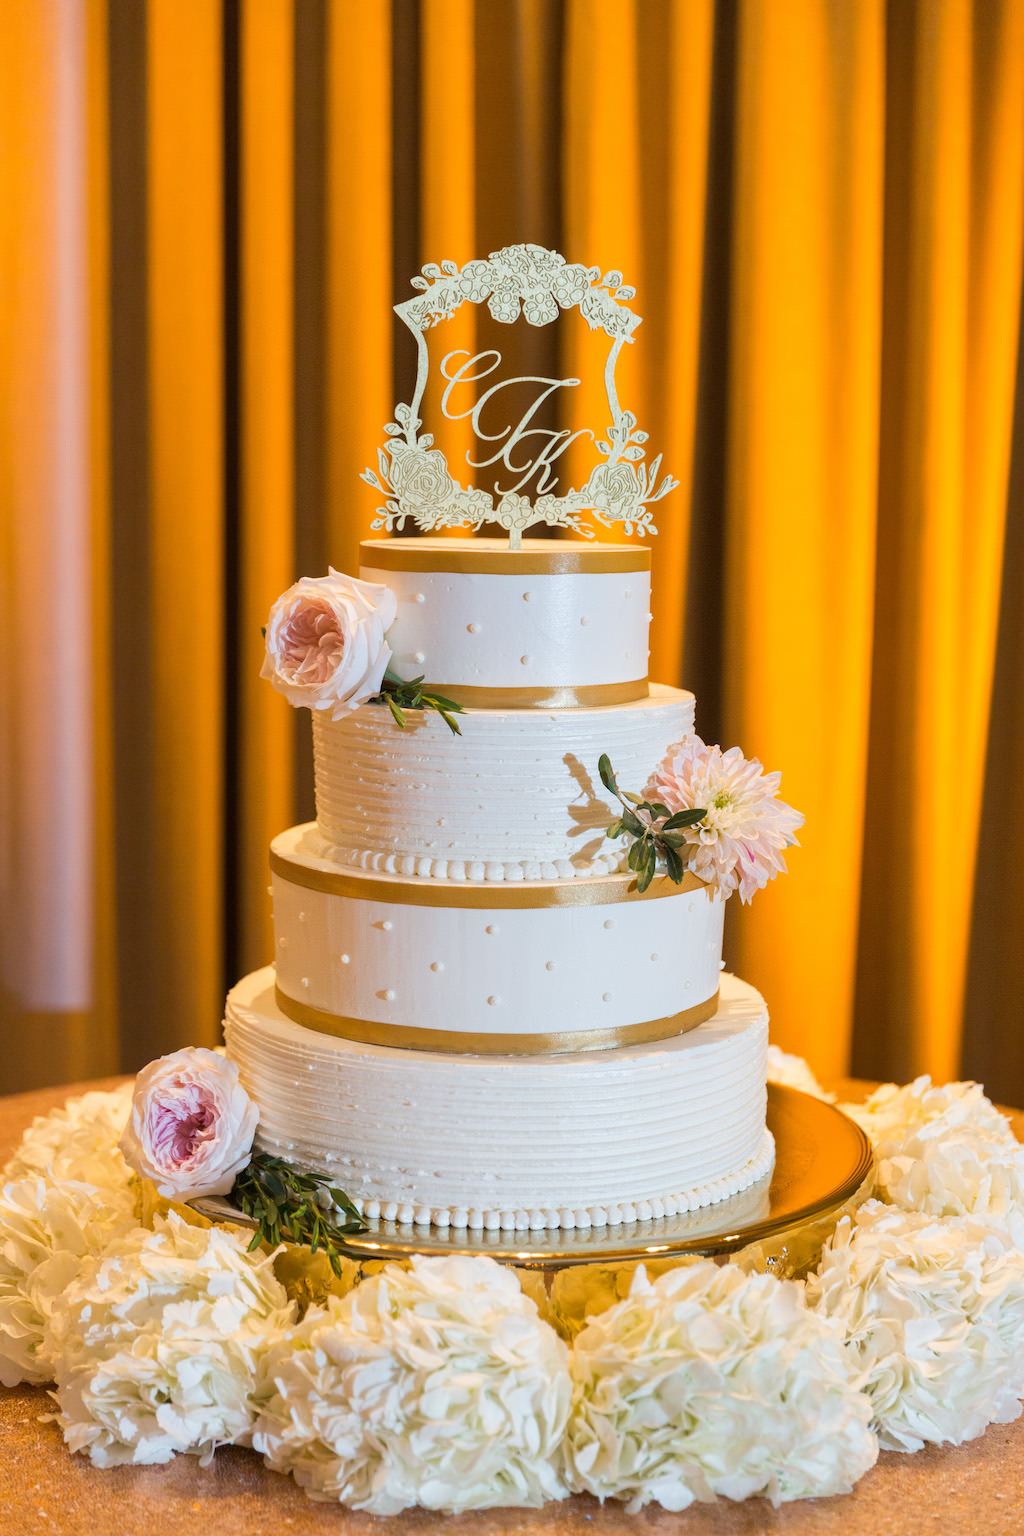 Four Tier Round White with Gold Ribbon Stripes Wedding Cake with Ornate Custom Monogram Floral Framed Cake Topper on Gold Cake Stand with White and Pink Flowers | St Pete Wedding Stationary and Monograms A and P Designs | Historic Hotel Wedding Venue, Caterer, and Cake Vinoy Renaissance